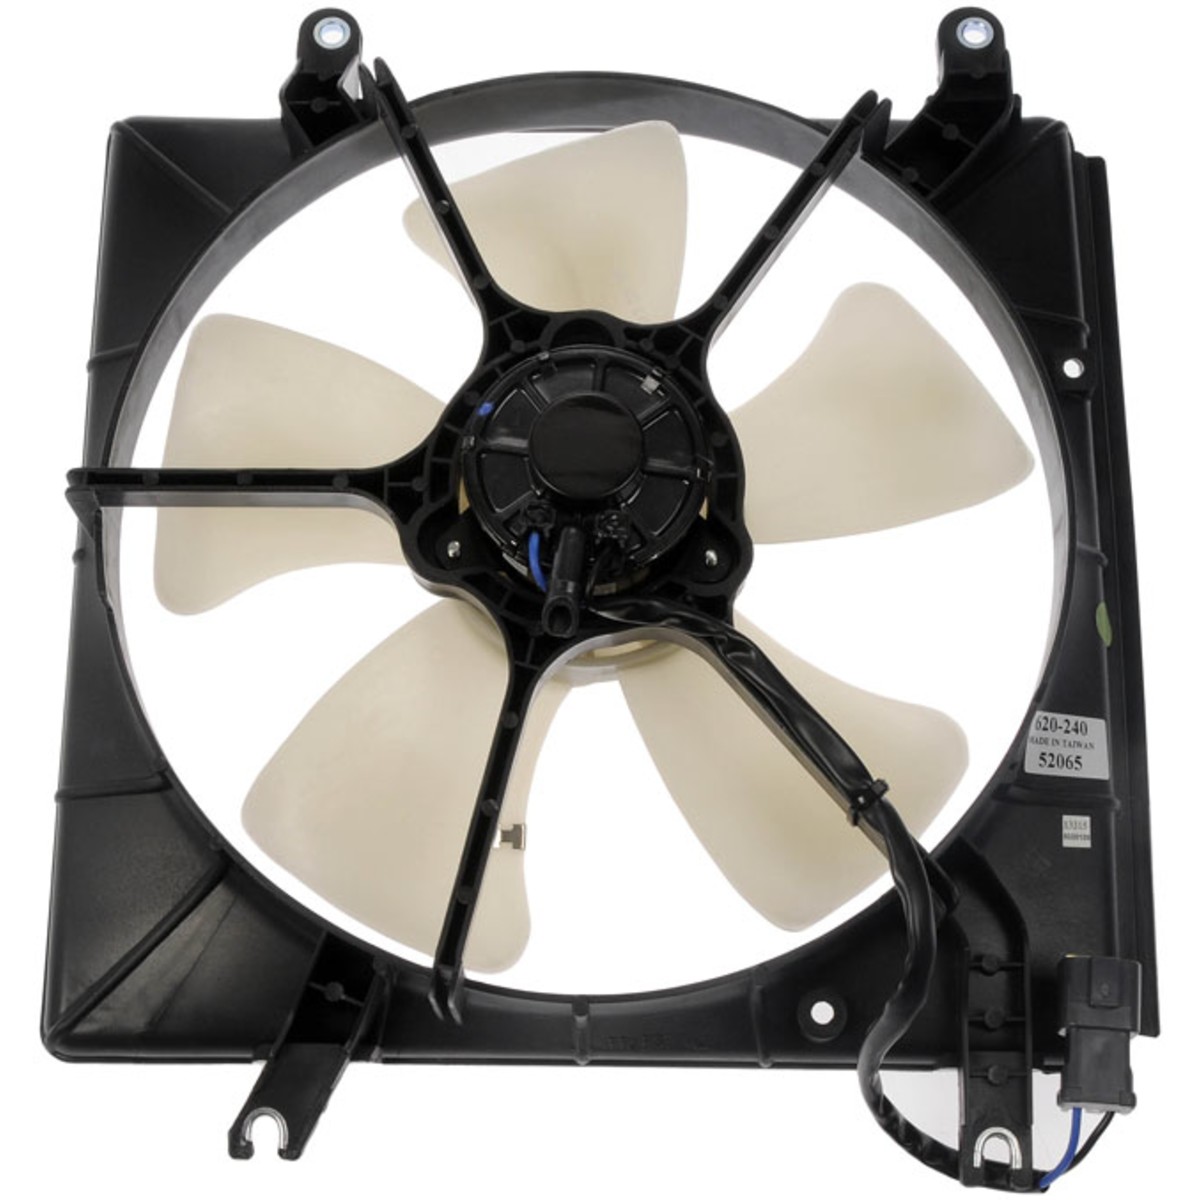 620-240 Dorman Cooling Fan Assembly for Honda Accord Prelude Acura CL 1997